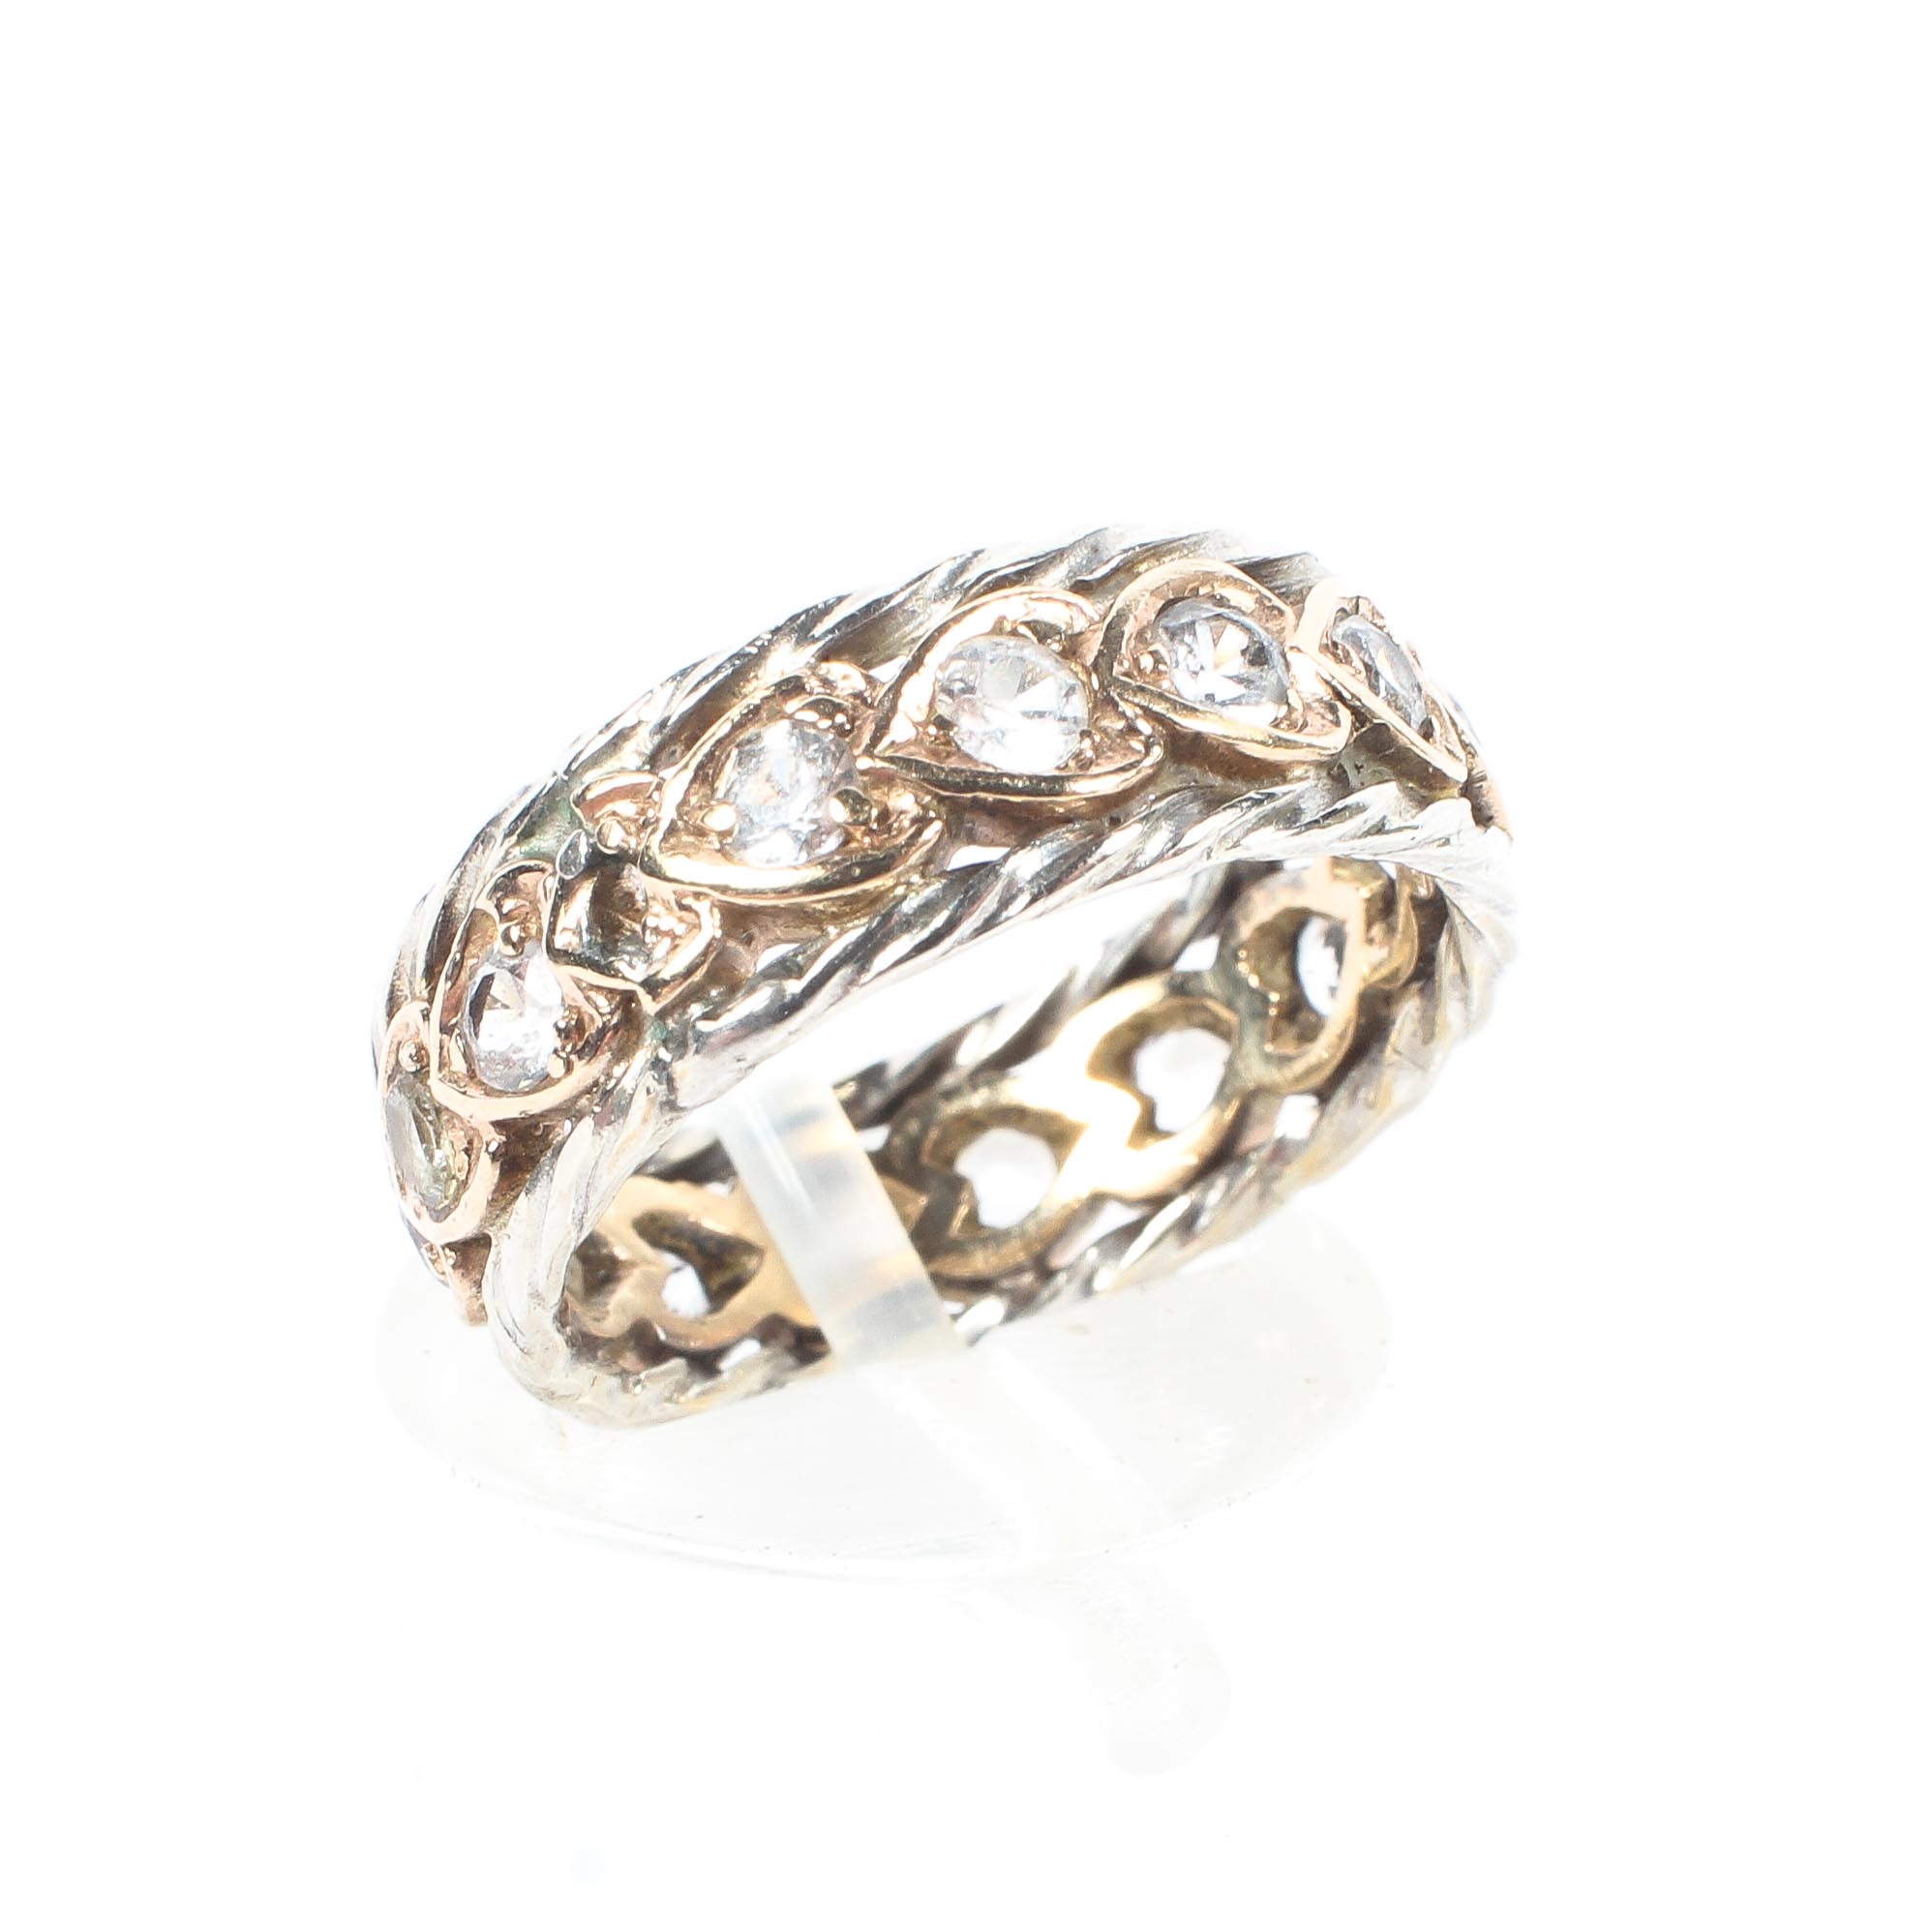 A 9ct yellow and white gold diamond full eternity ring.